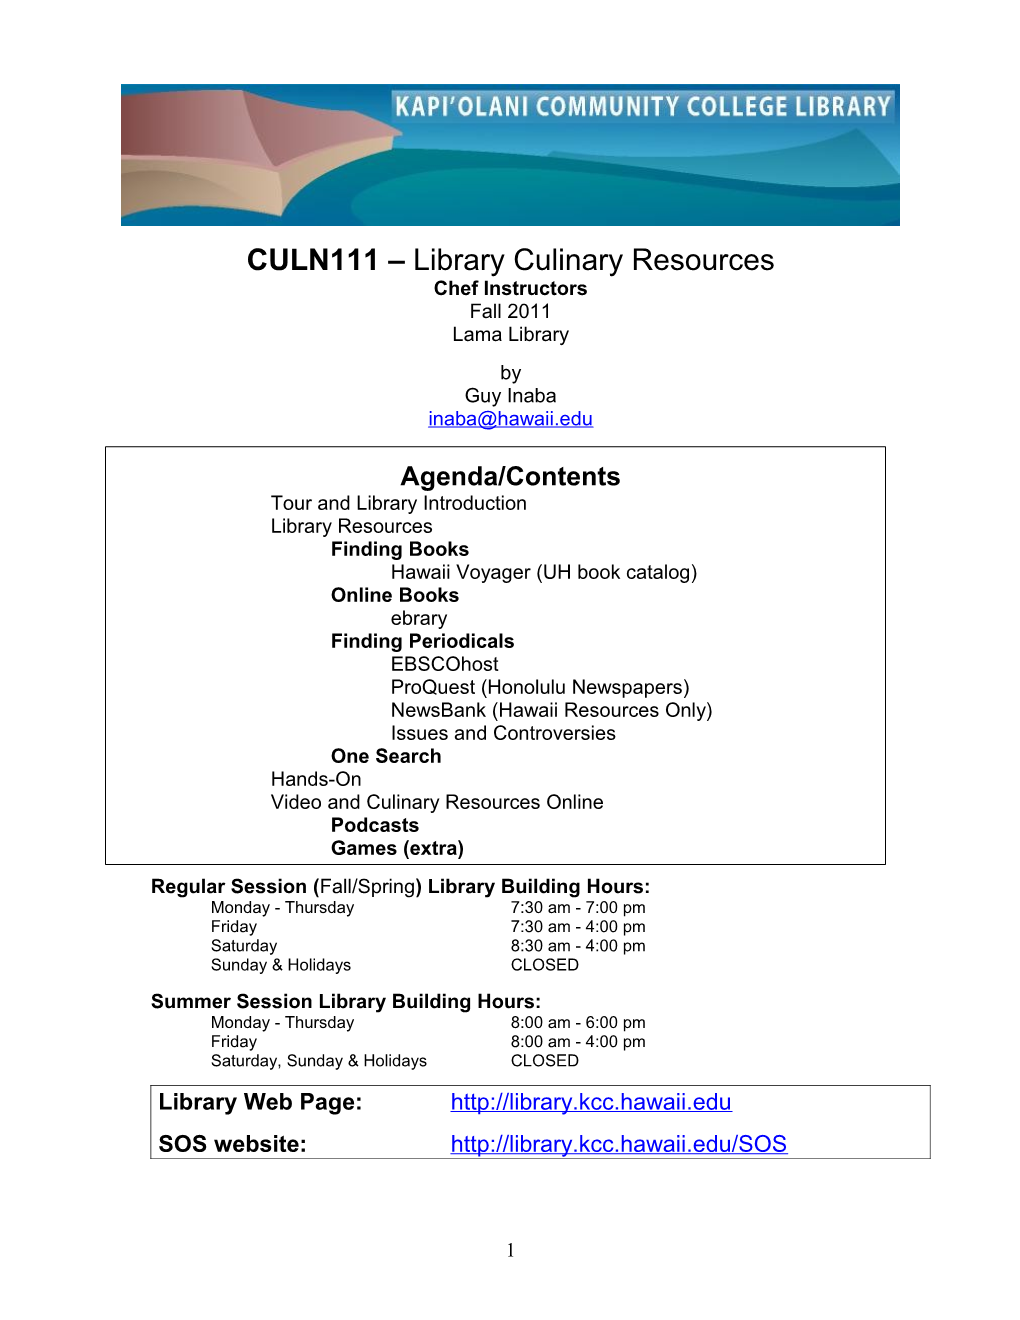 CULN111 Library Culinary Resources